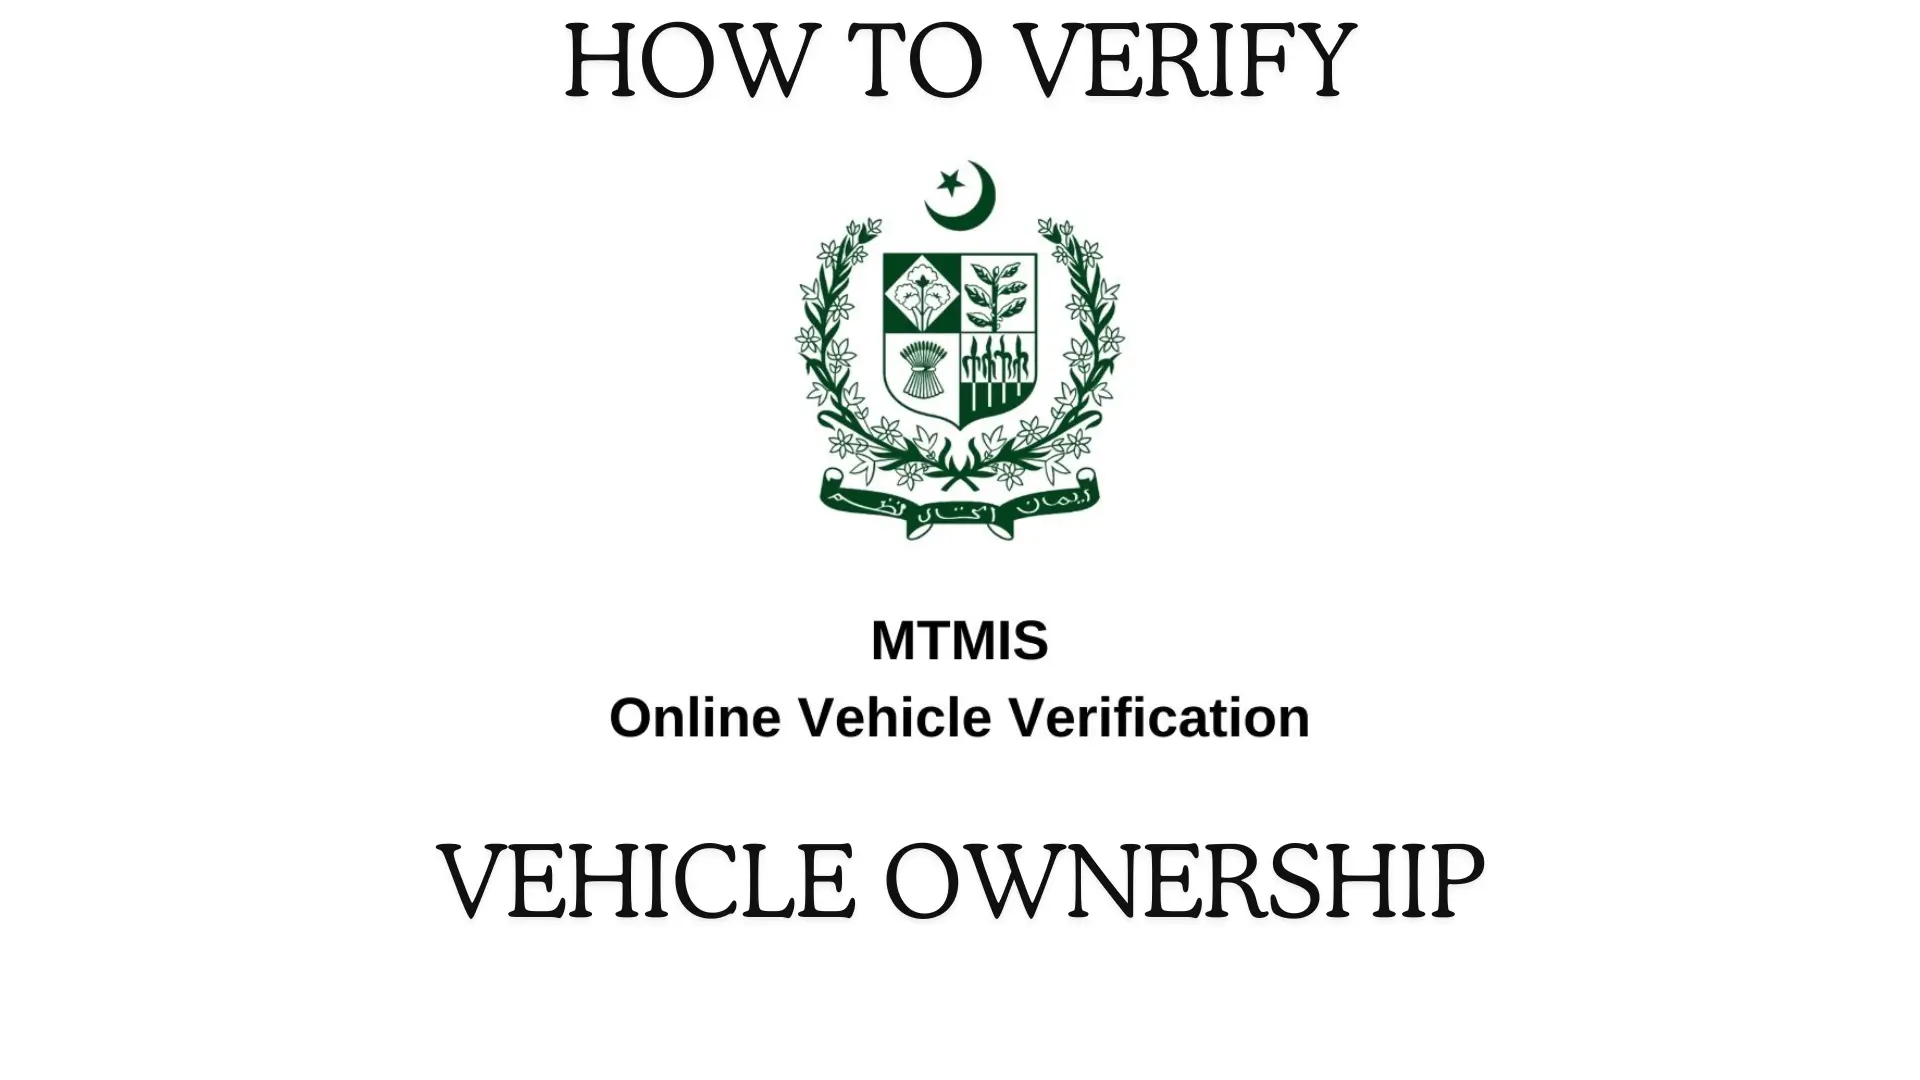 How To Verify Vehicle Ownership